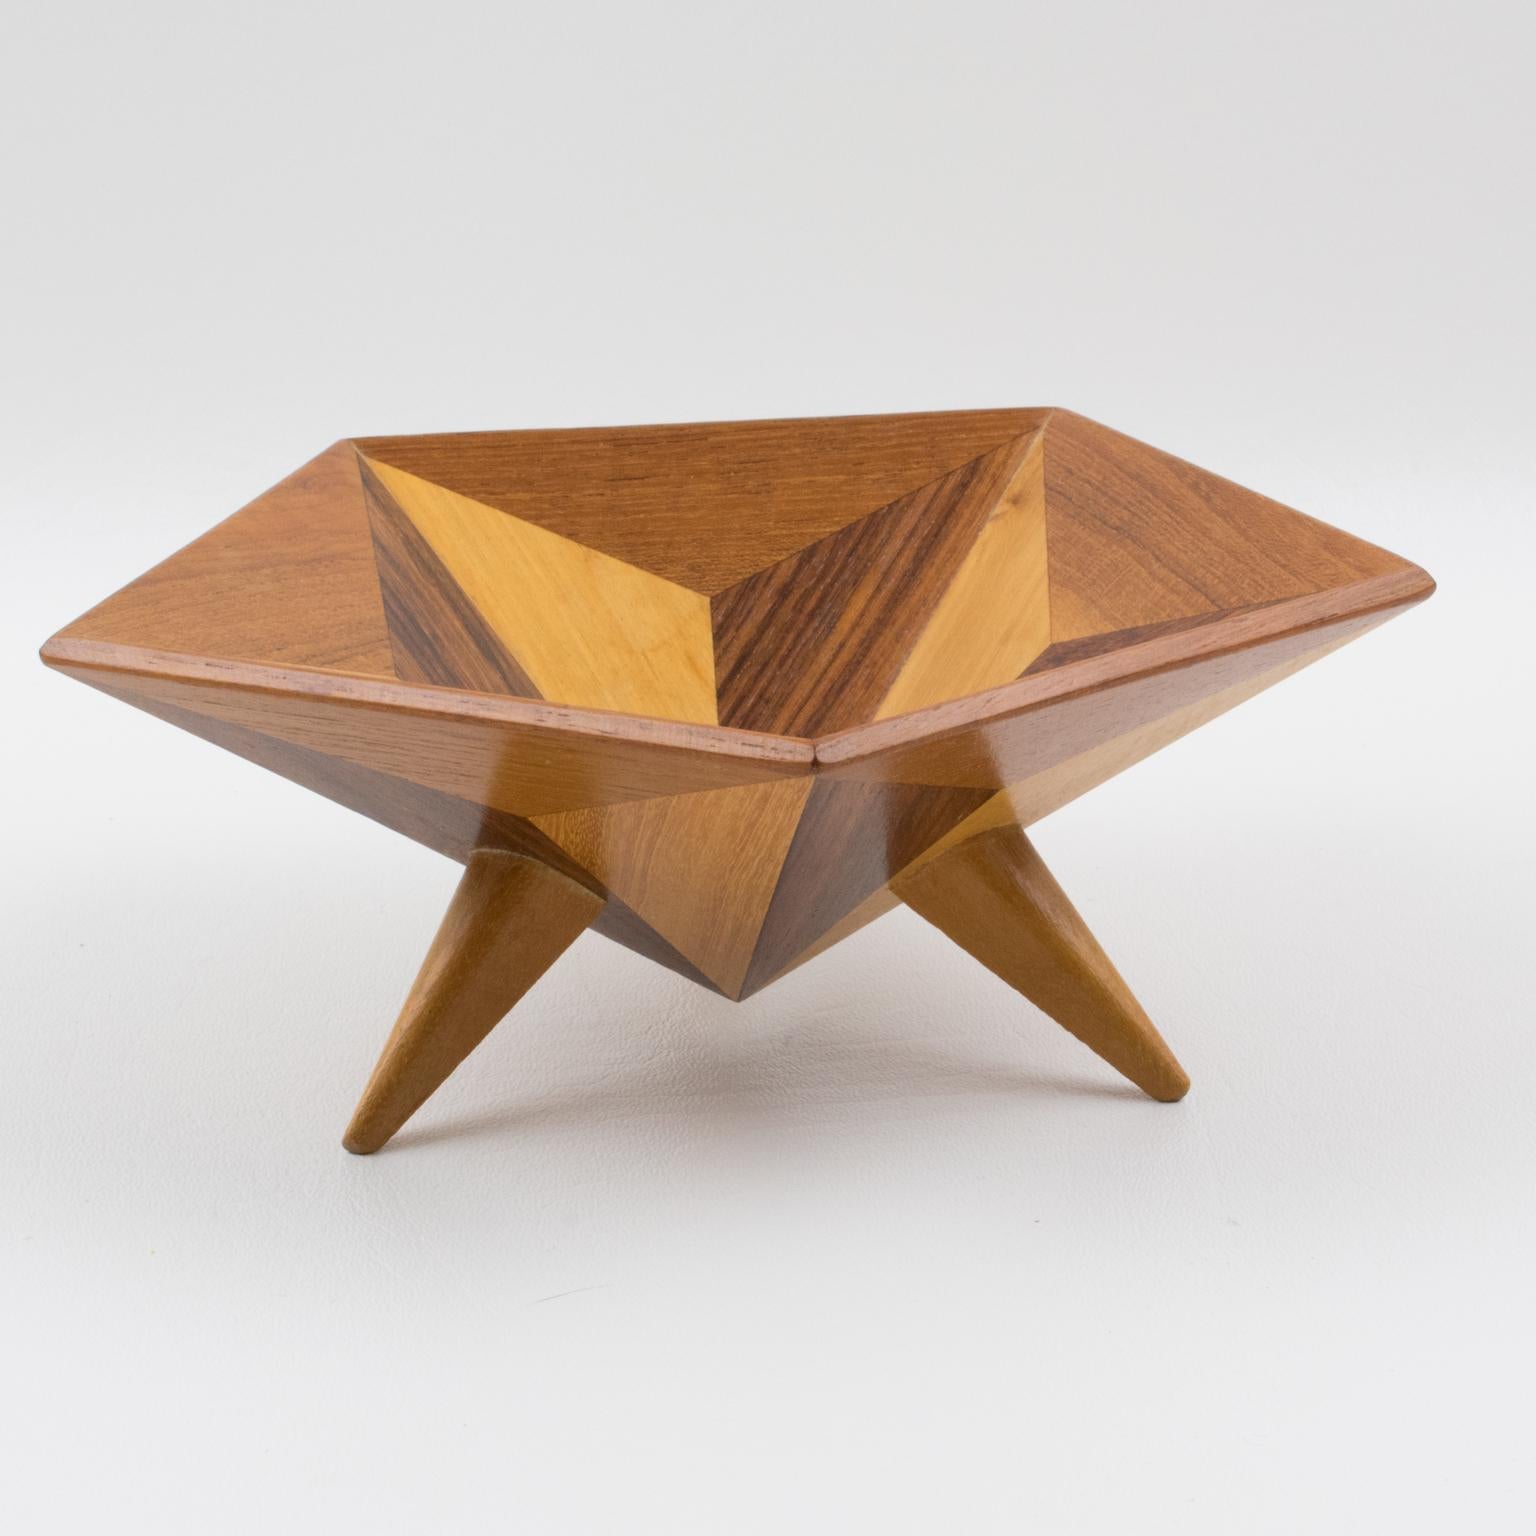 Exquisite modernist Space Age Danish carved bowl or centerpiece with wood marquetry. A geometric shape in typical spatial ship design with different woods in extremely fine grain, mixing mahogany, teak, rosewood, and limewood. No visible maker's